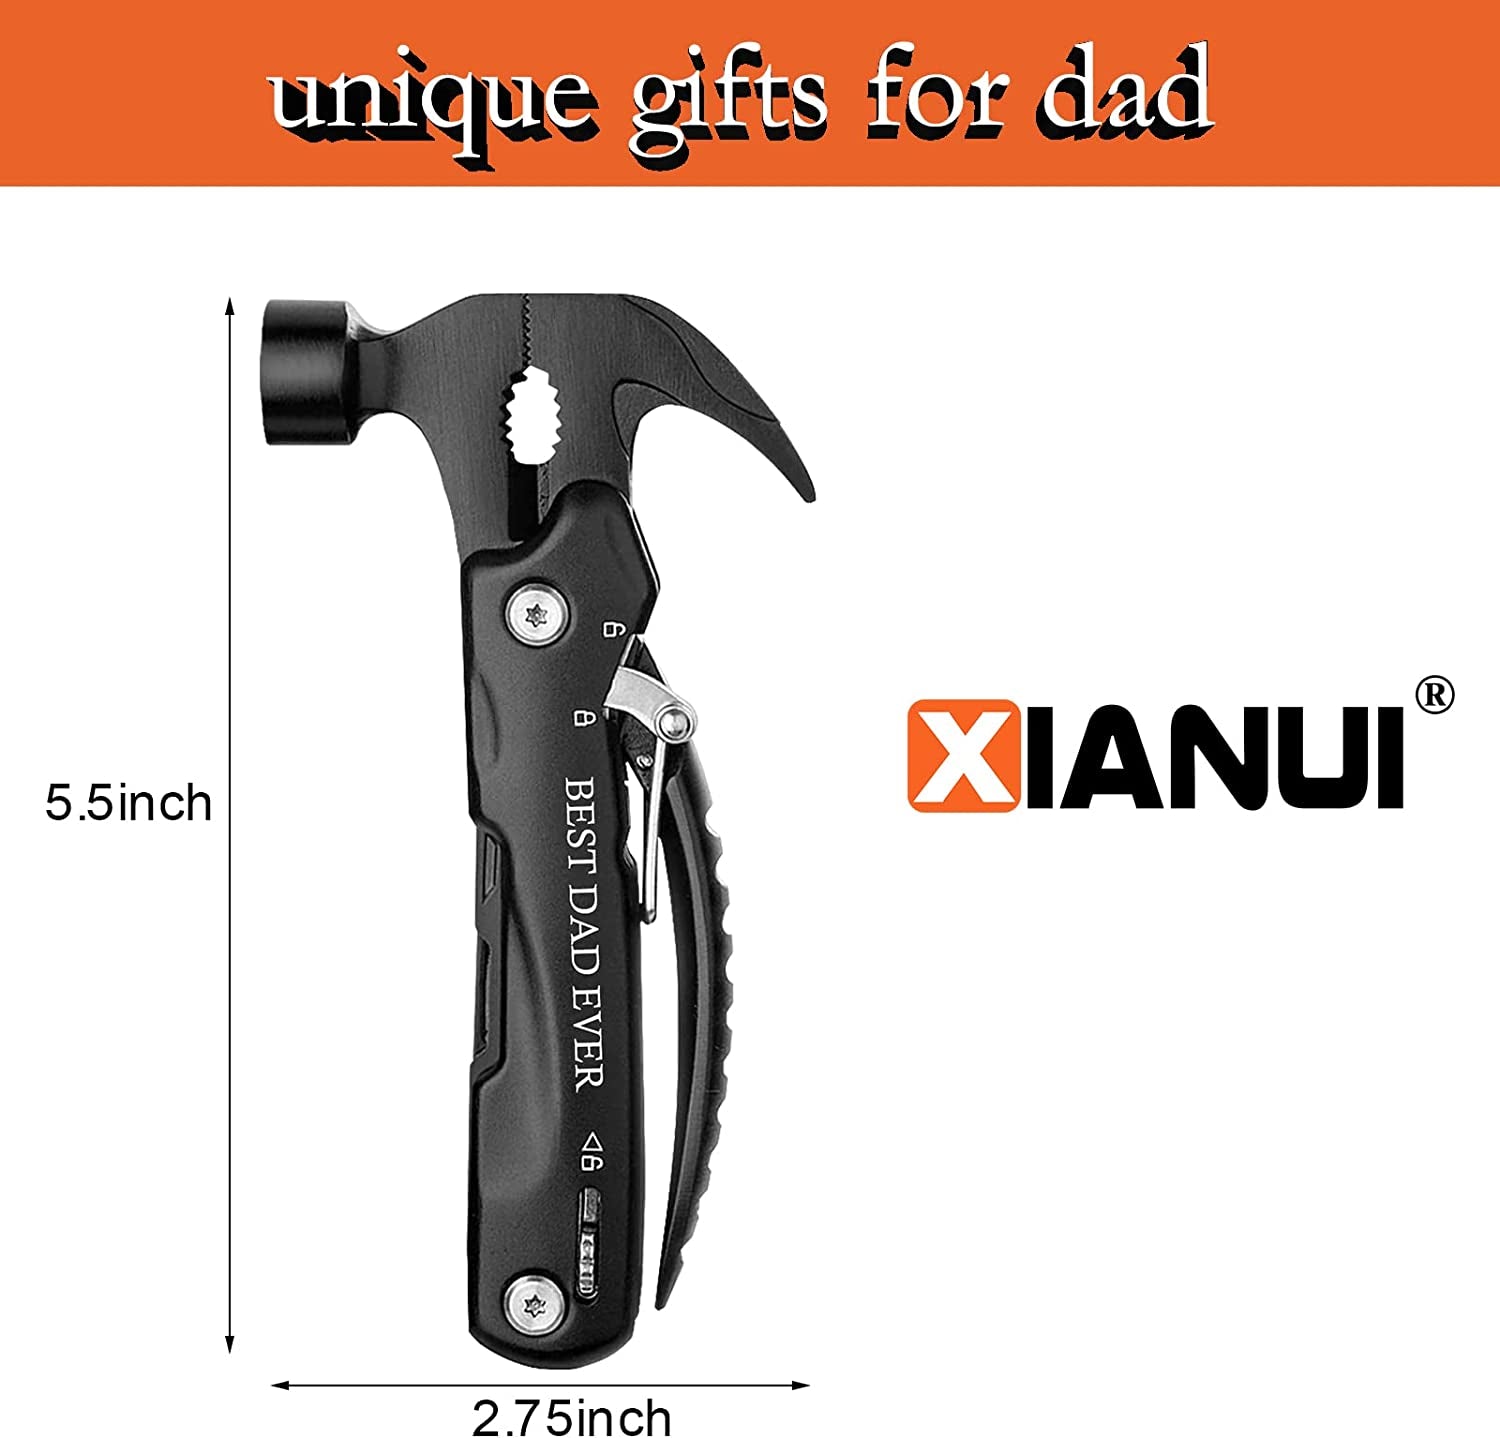 Gifts for Dad, All in One Hammer Multitool, Dad Gifts from Daughter Son, Unique Birthday Gift Idea, Gifts for Dad Who Has Everything and Wants Nothing, Christmas Stocking Stuffers for Dad